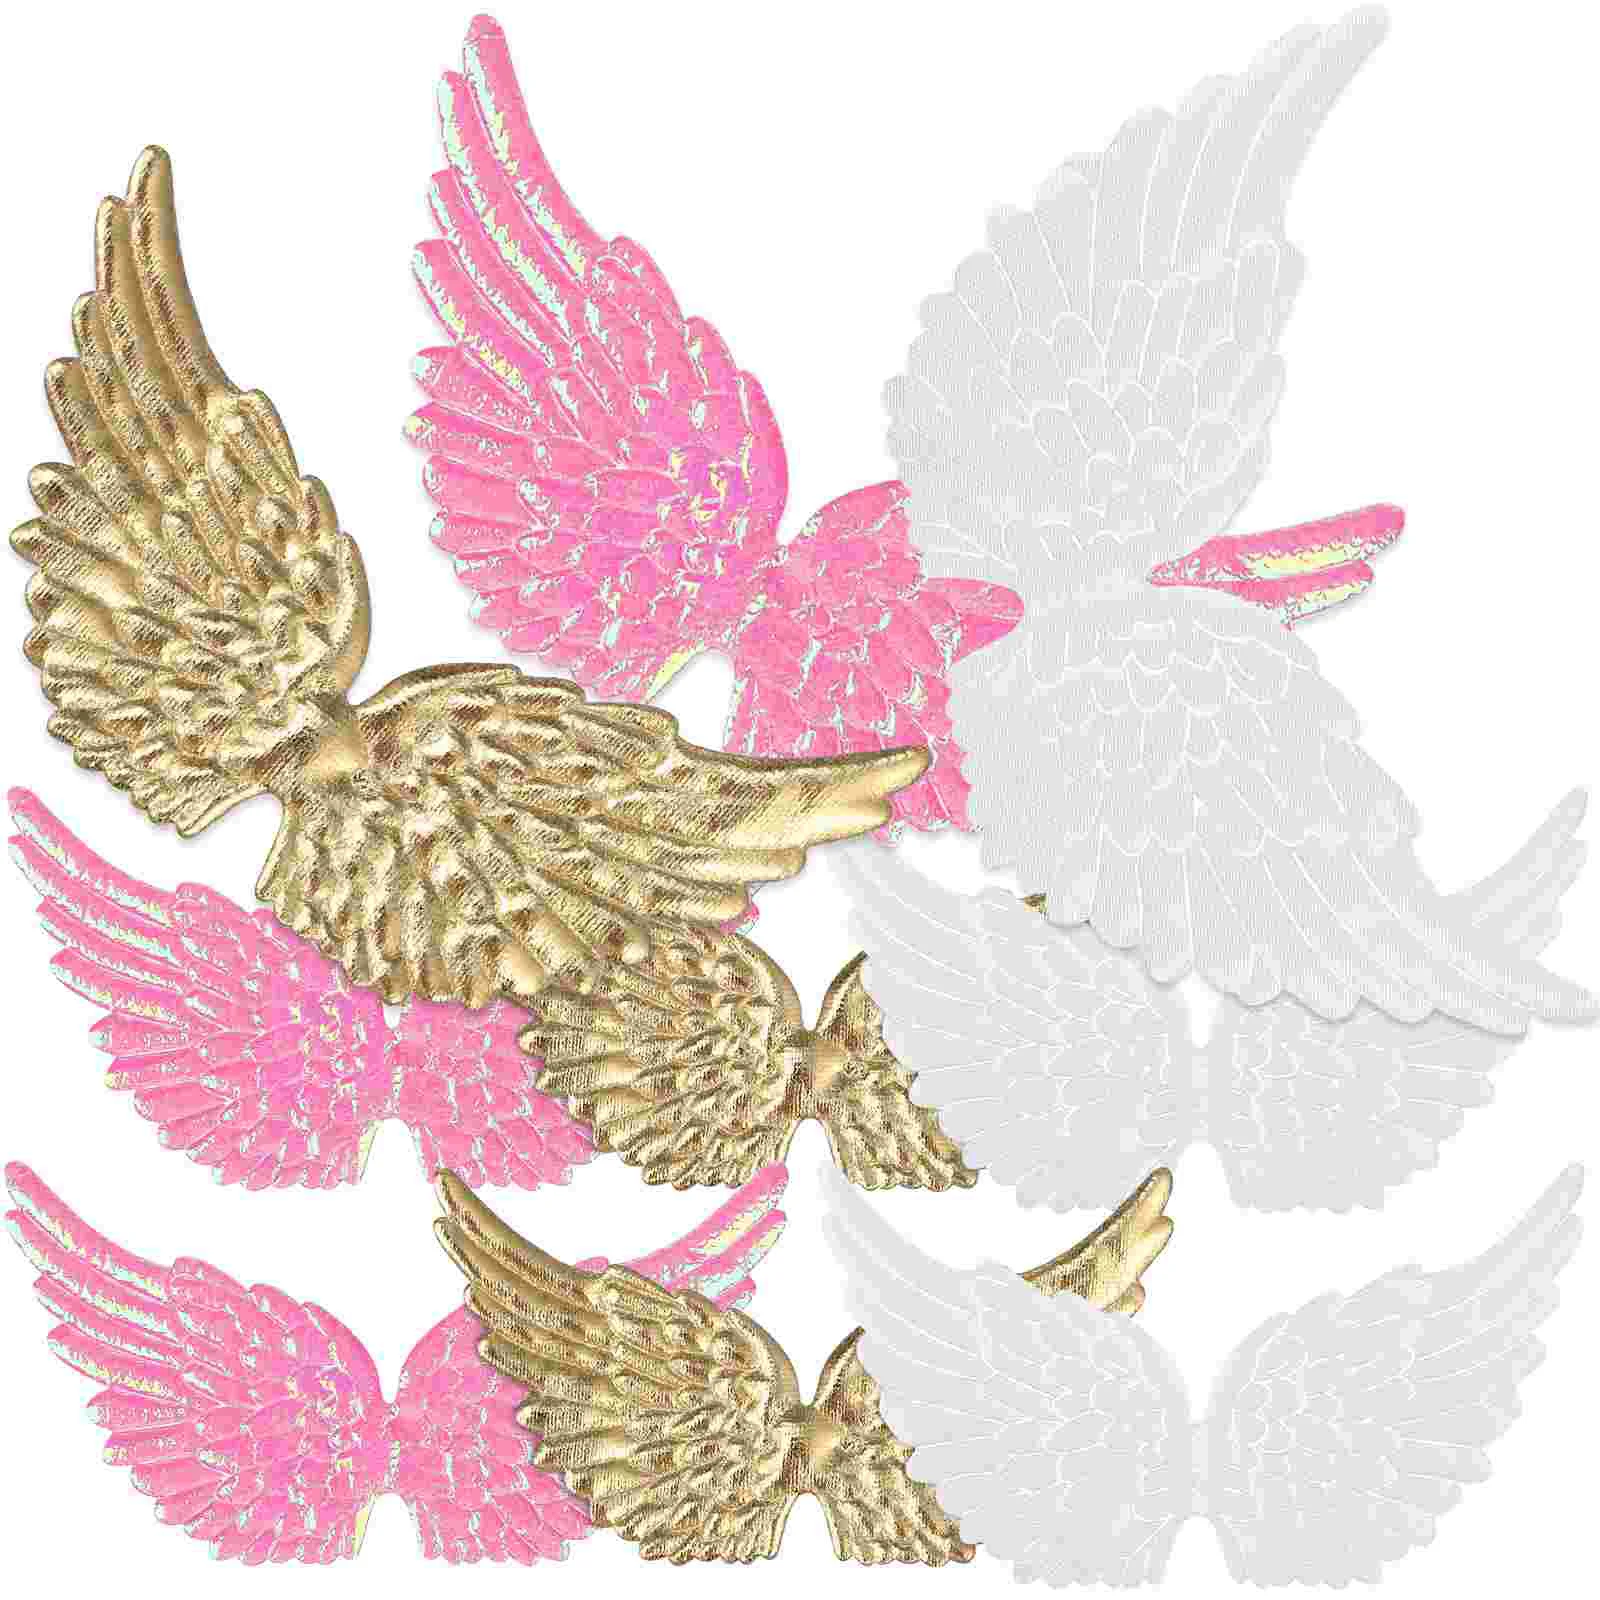 

36 Pcs Angel Wings Appliques Embellishments Small Clothing Miniature Patches Decor Clothes Crafts Girl Fabric